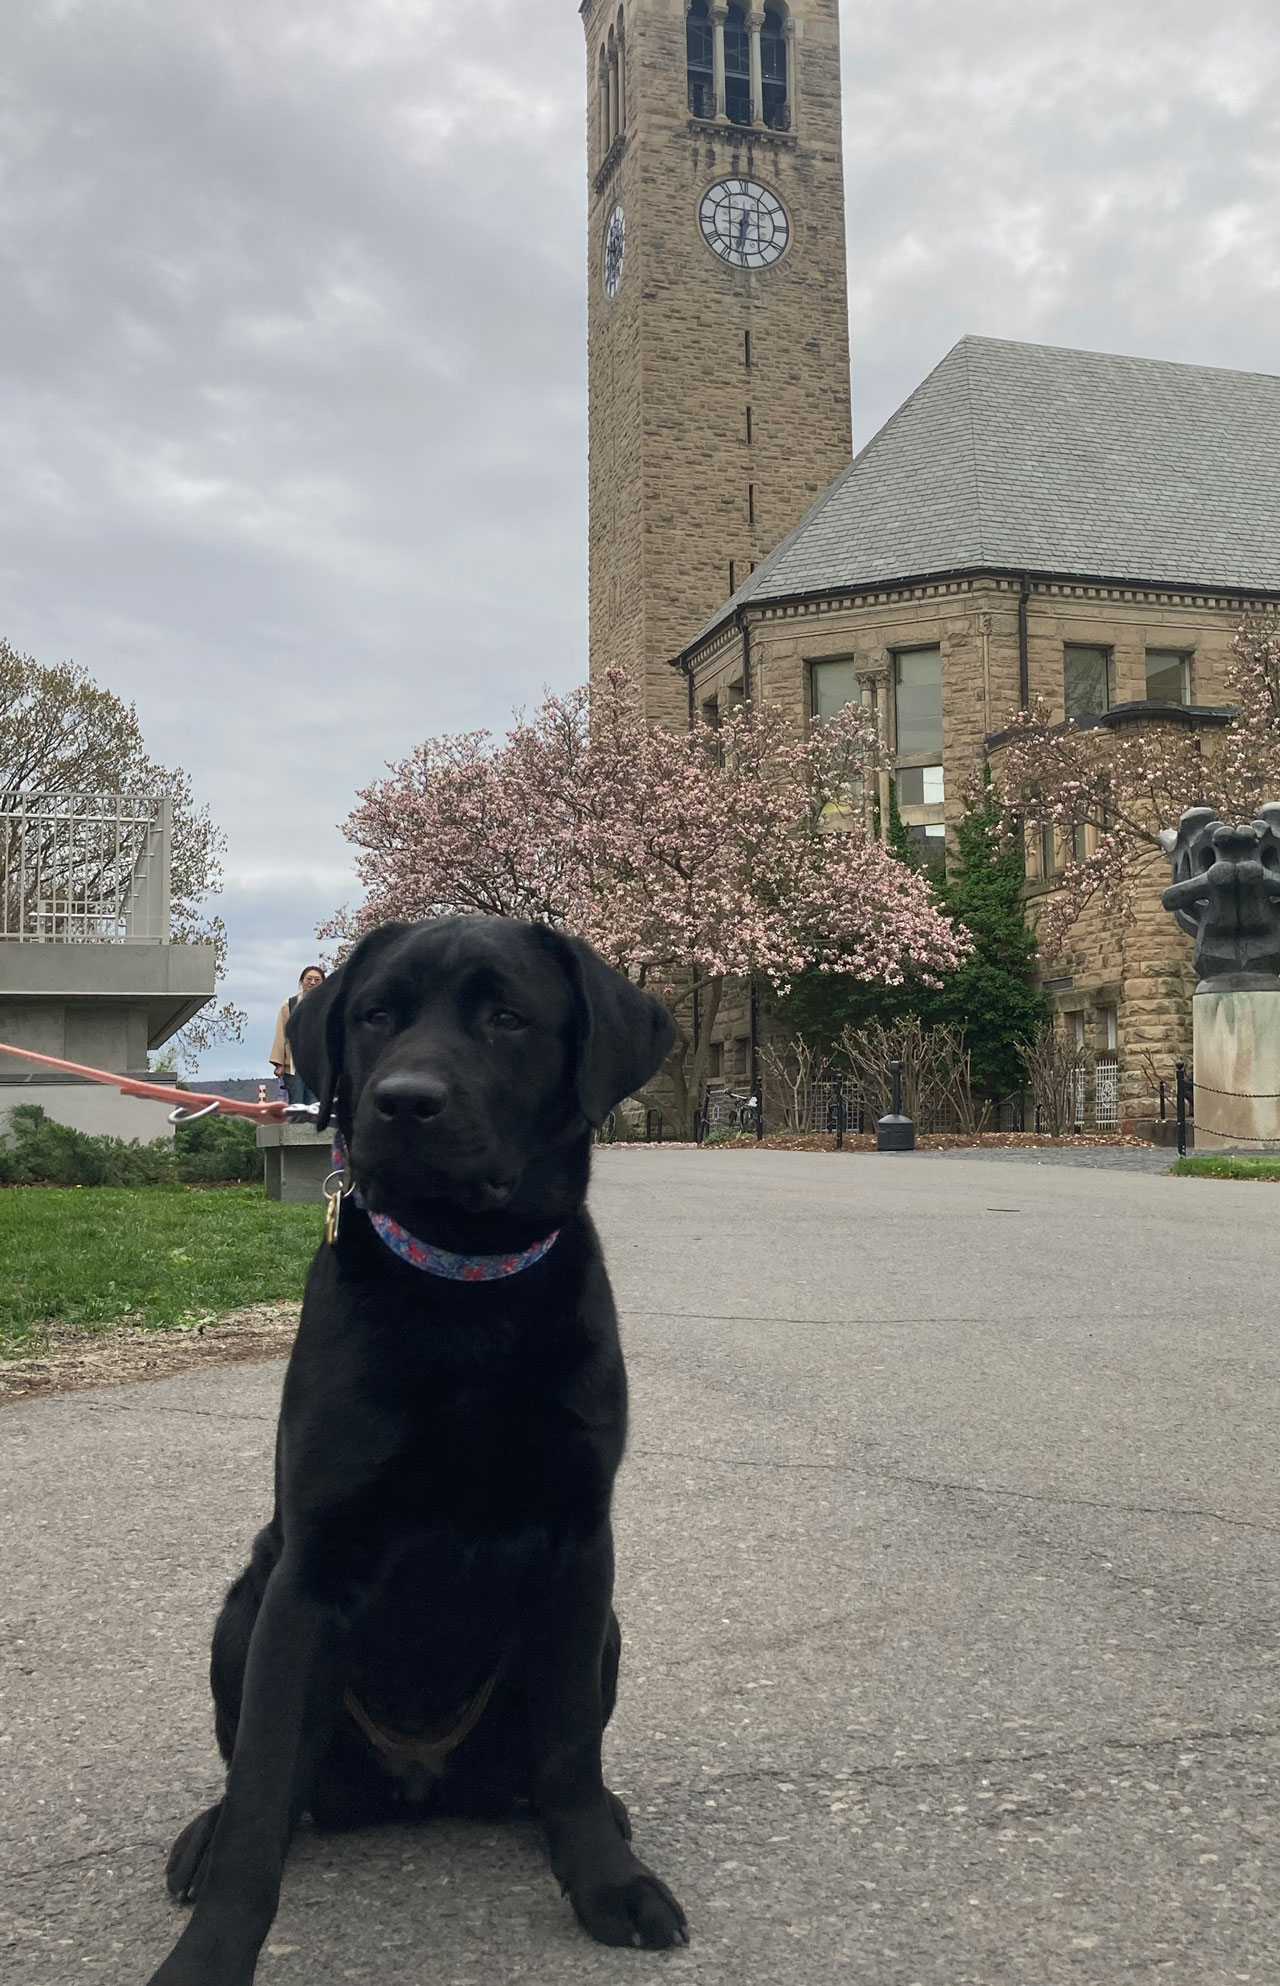 A black Labrador seated in front of the Cornell tower